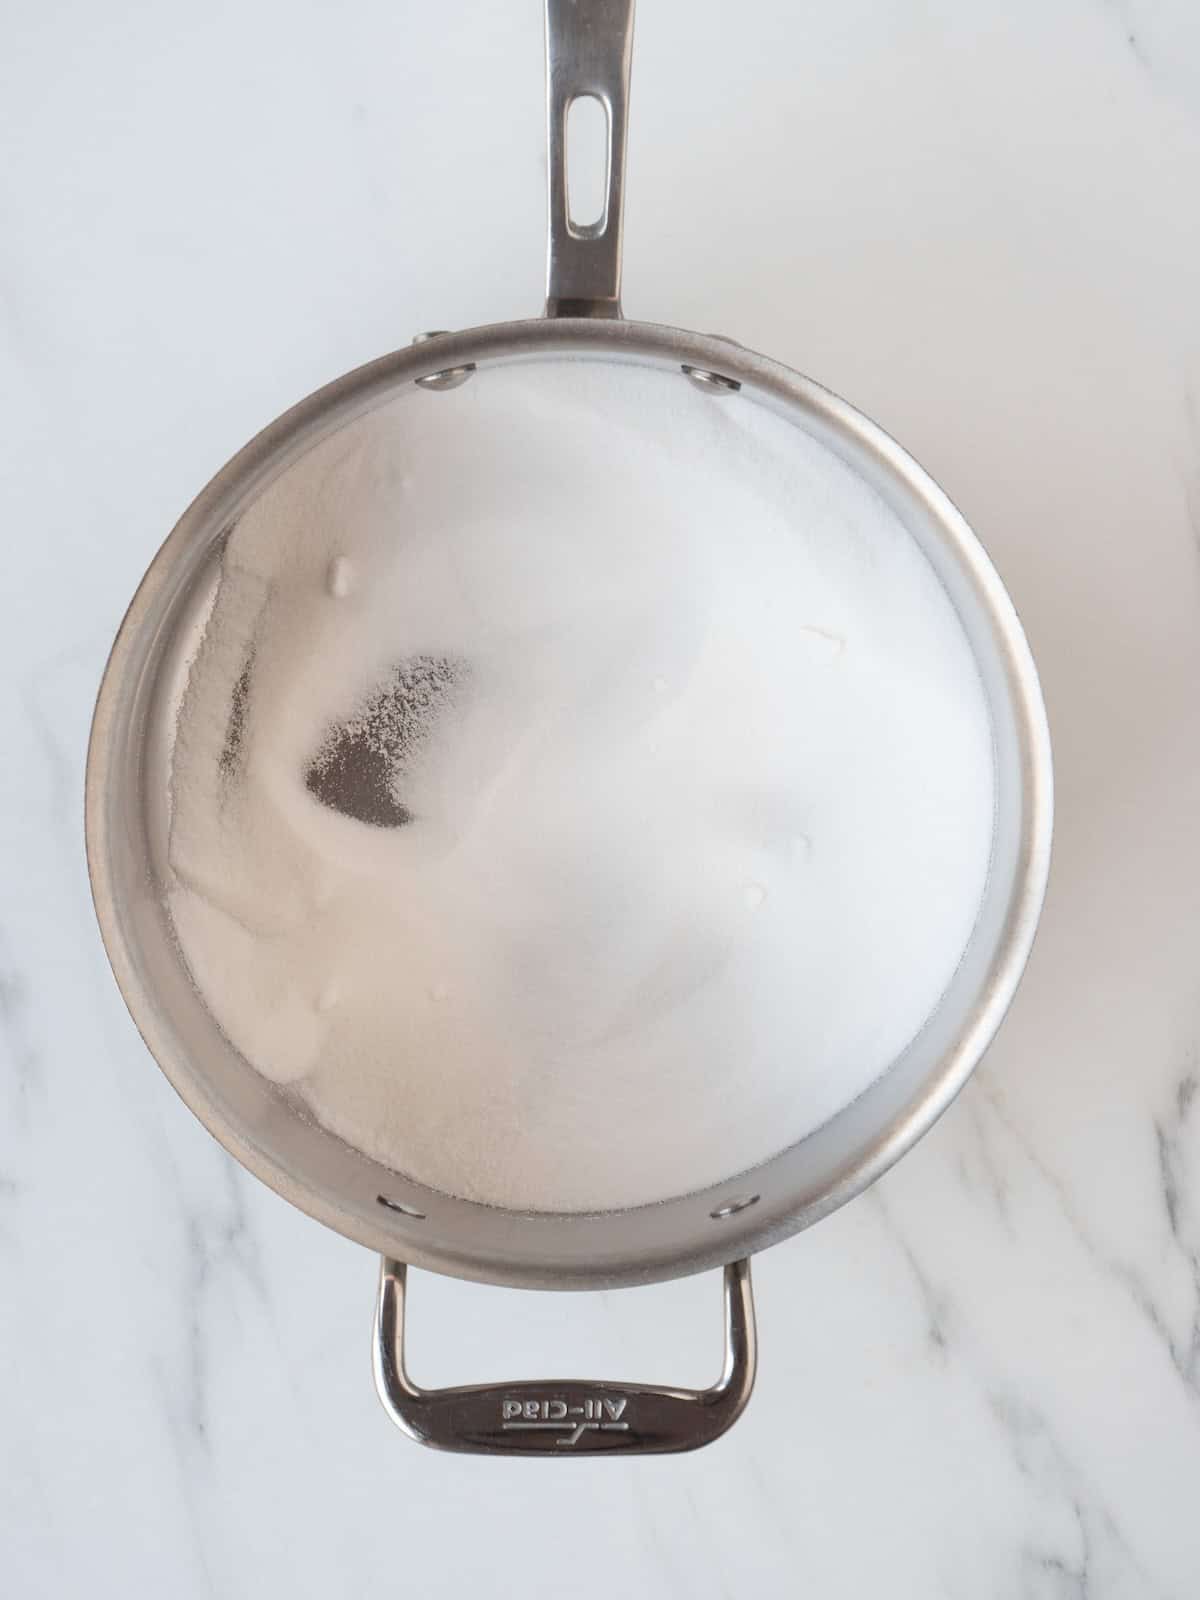 A saucepan with sugar and water being heated together.